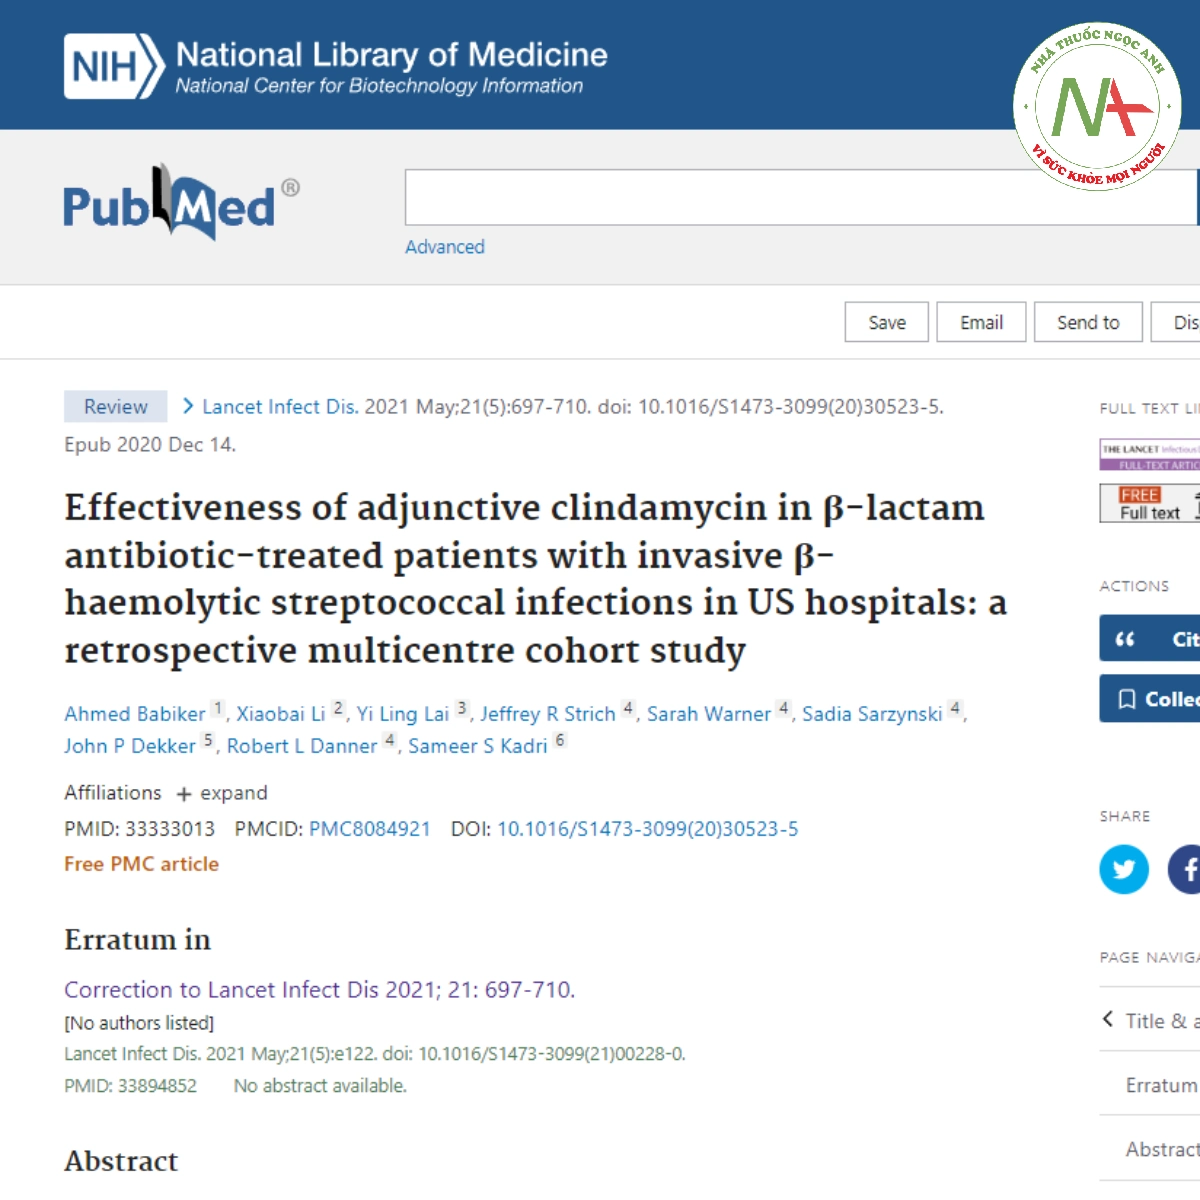 Effectiveness of adjunctive clindamycin in β-lactam antibiotic-treated patients with invasive β-haemolytic streptococcal infections in US hospitals: a retrospective multicentre cohort study